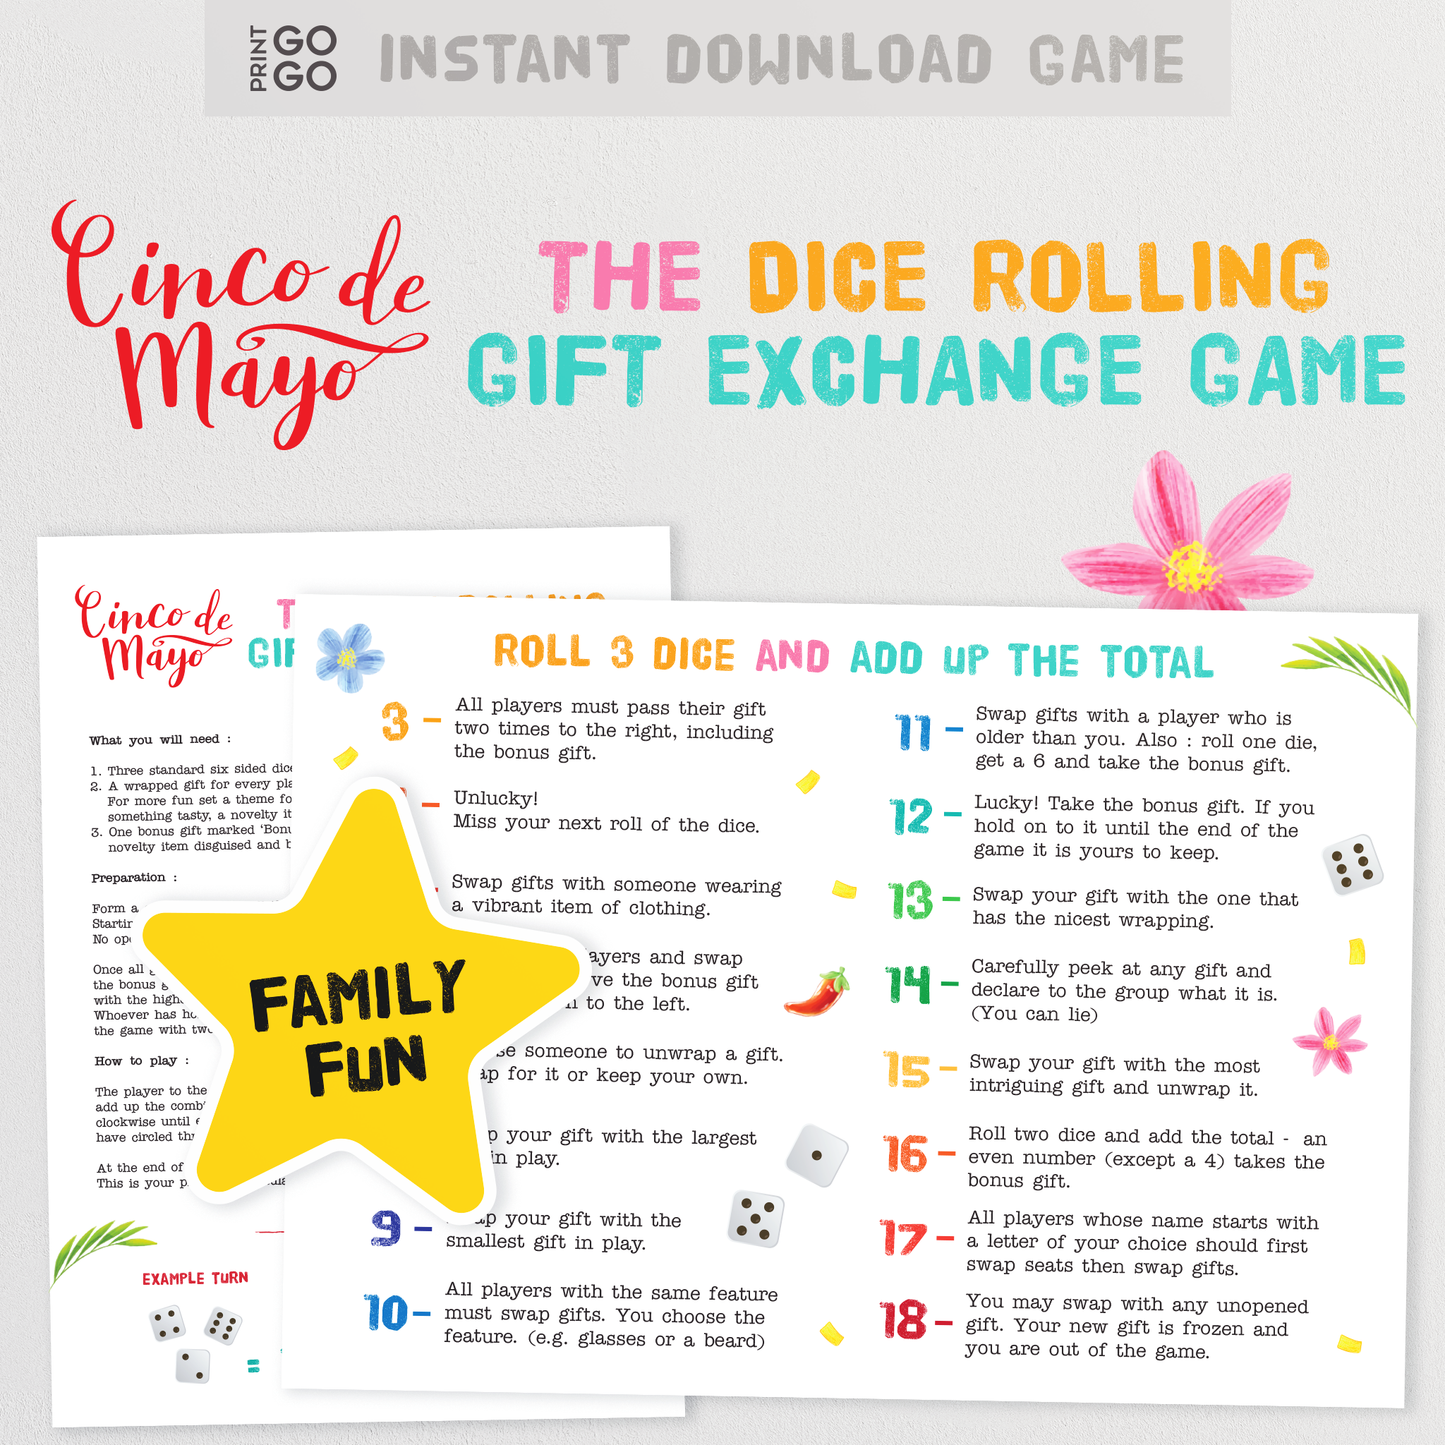 Cinco de Mayo Roll the Dice Gift Exchange Game